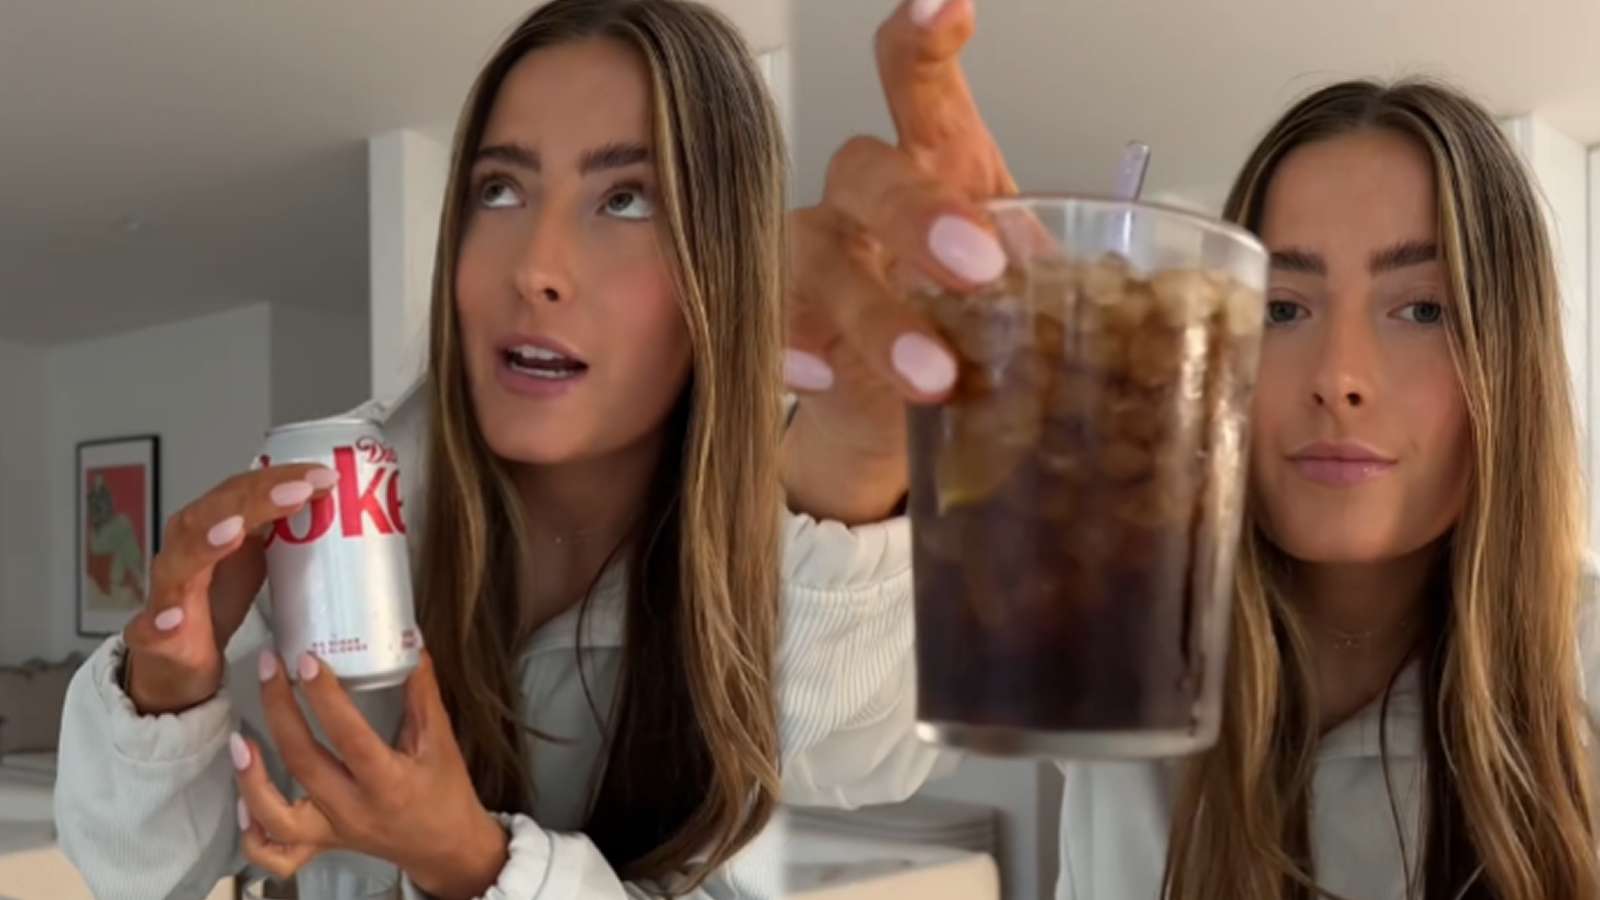 What is marinated Diet Coke